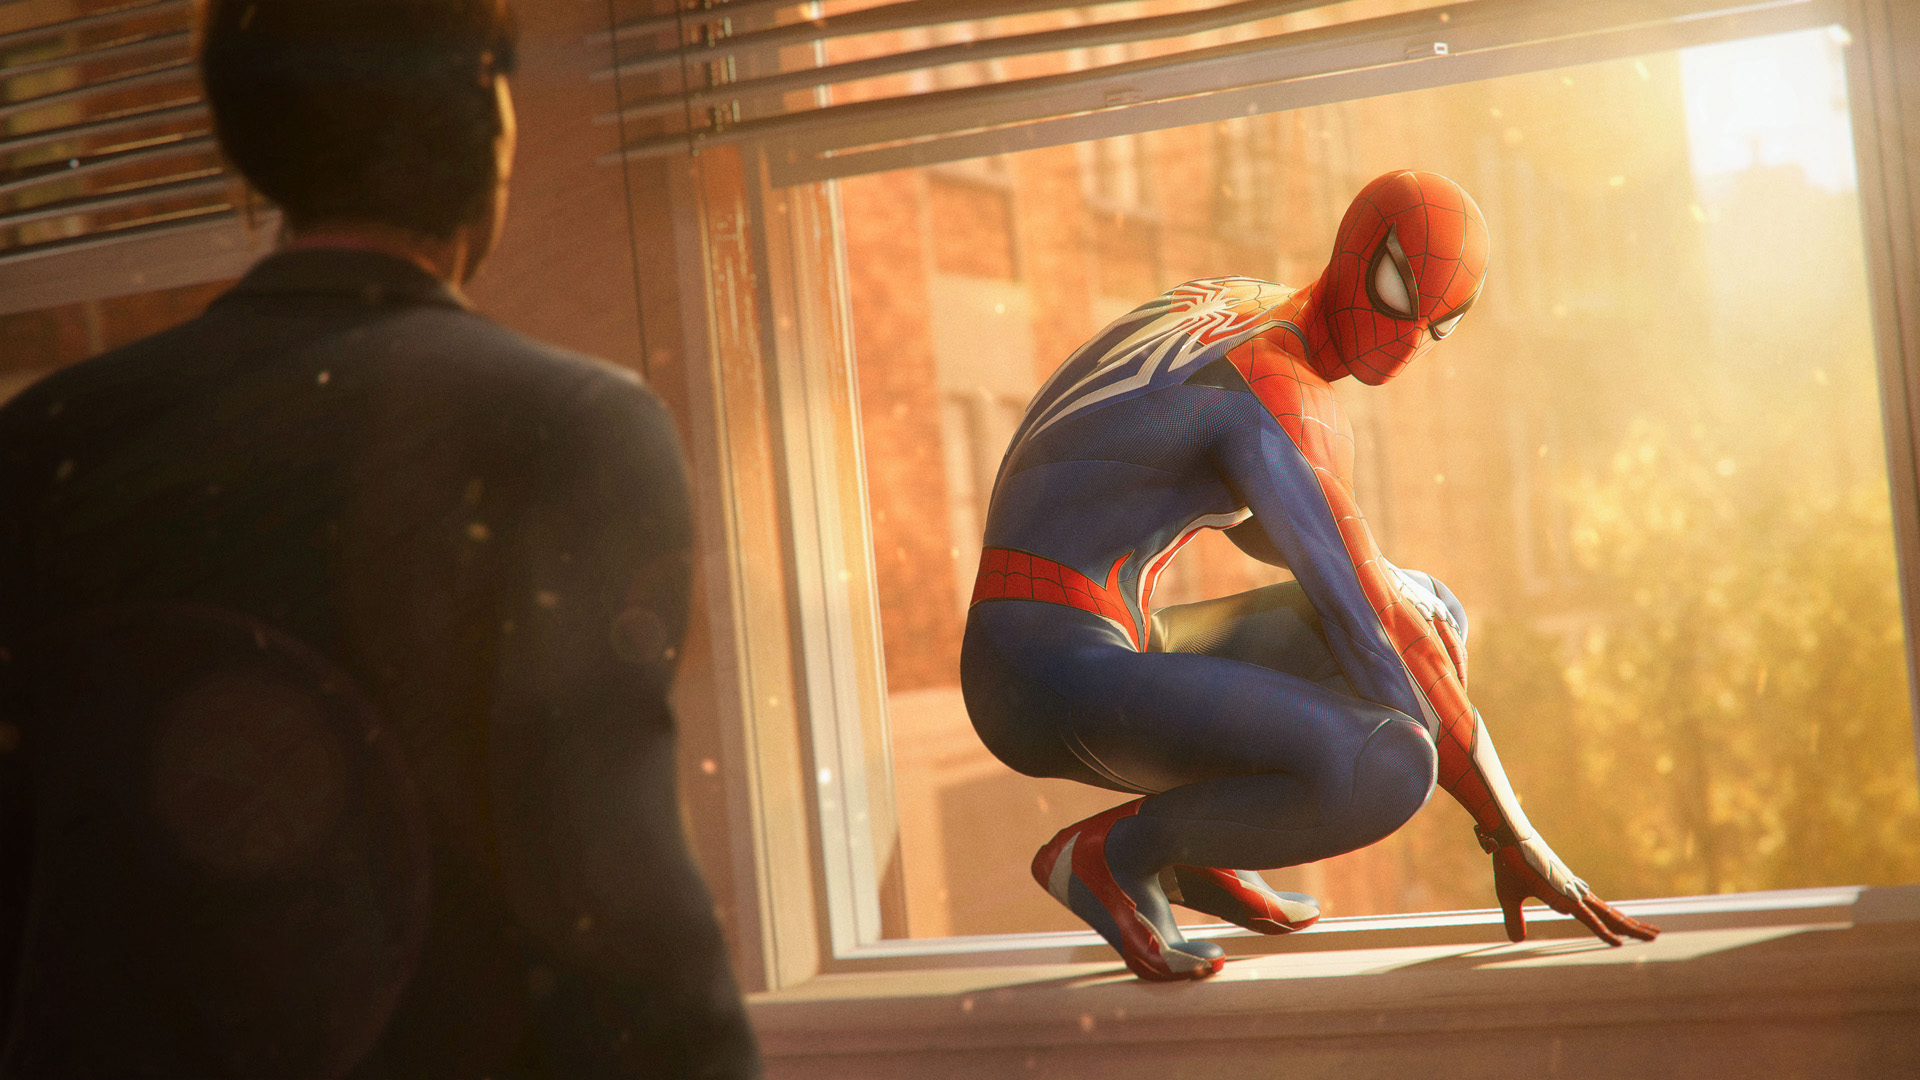 Spider-Man 2 Review — The Best Superhero Game Ever?